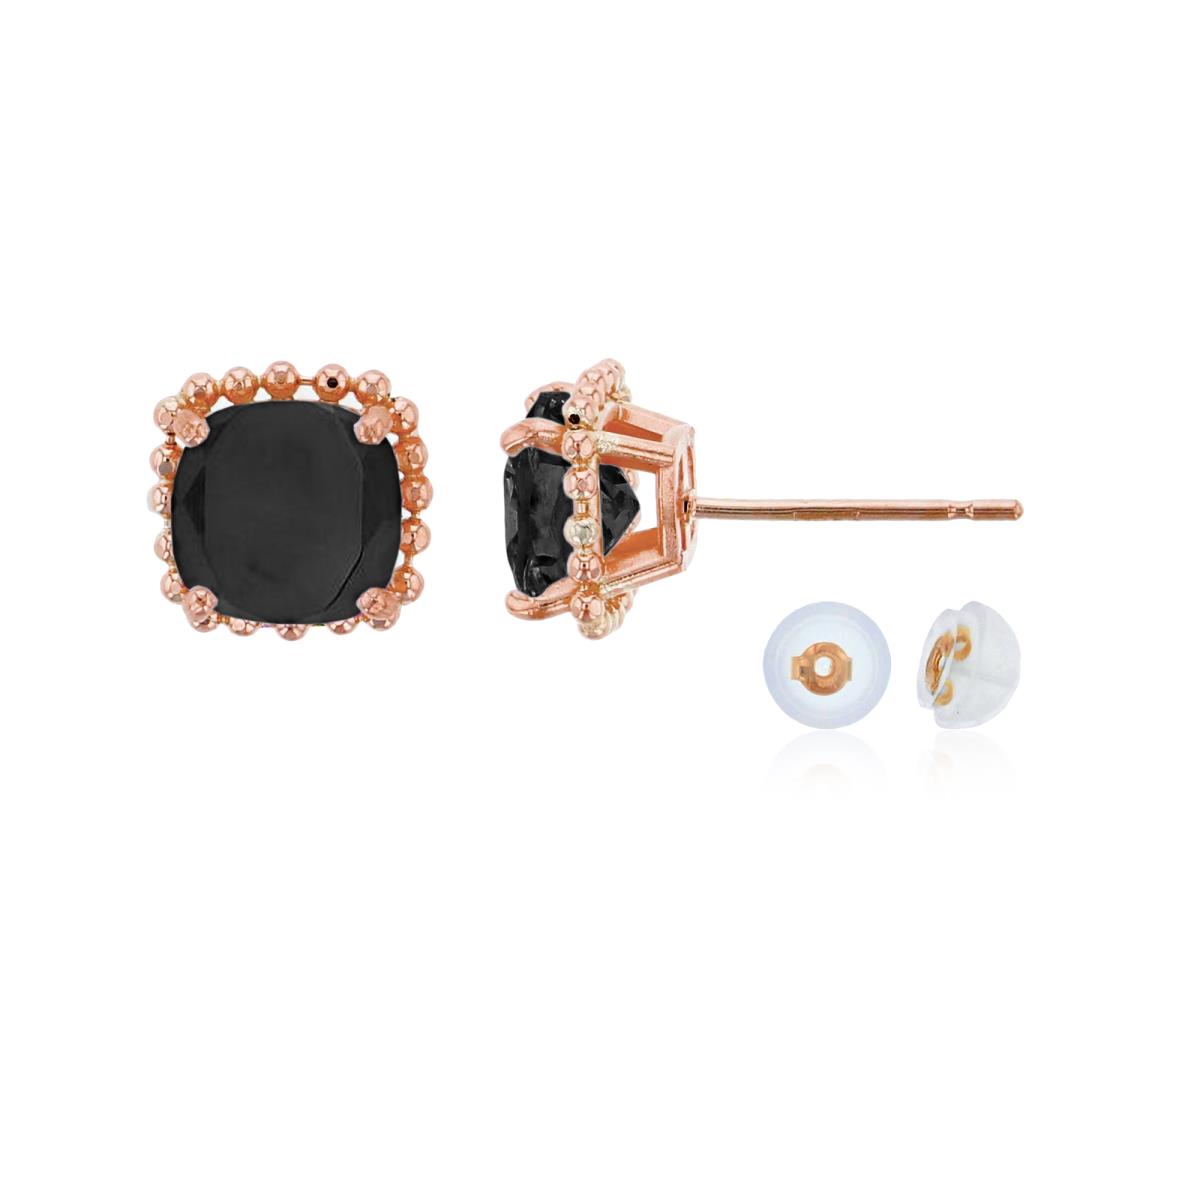 10K Rose Gold 6x6mm Cushion Cut Onyx Bead Frame Stud Earring with Silicone Back